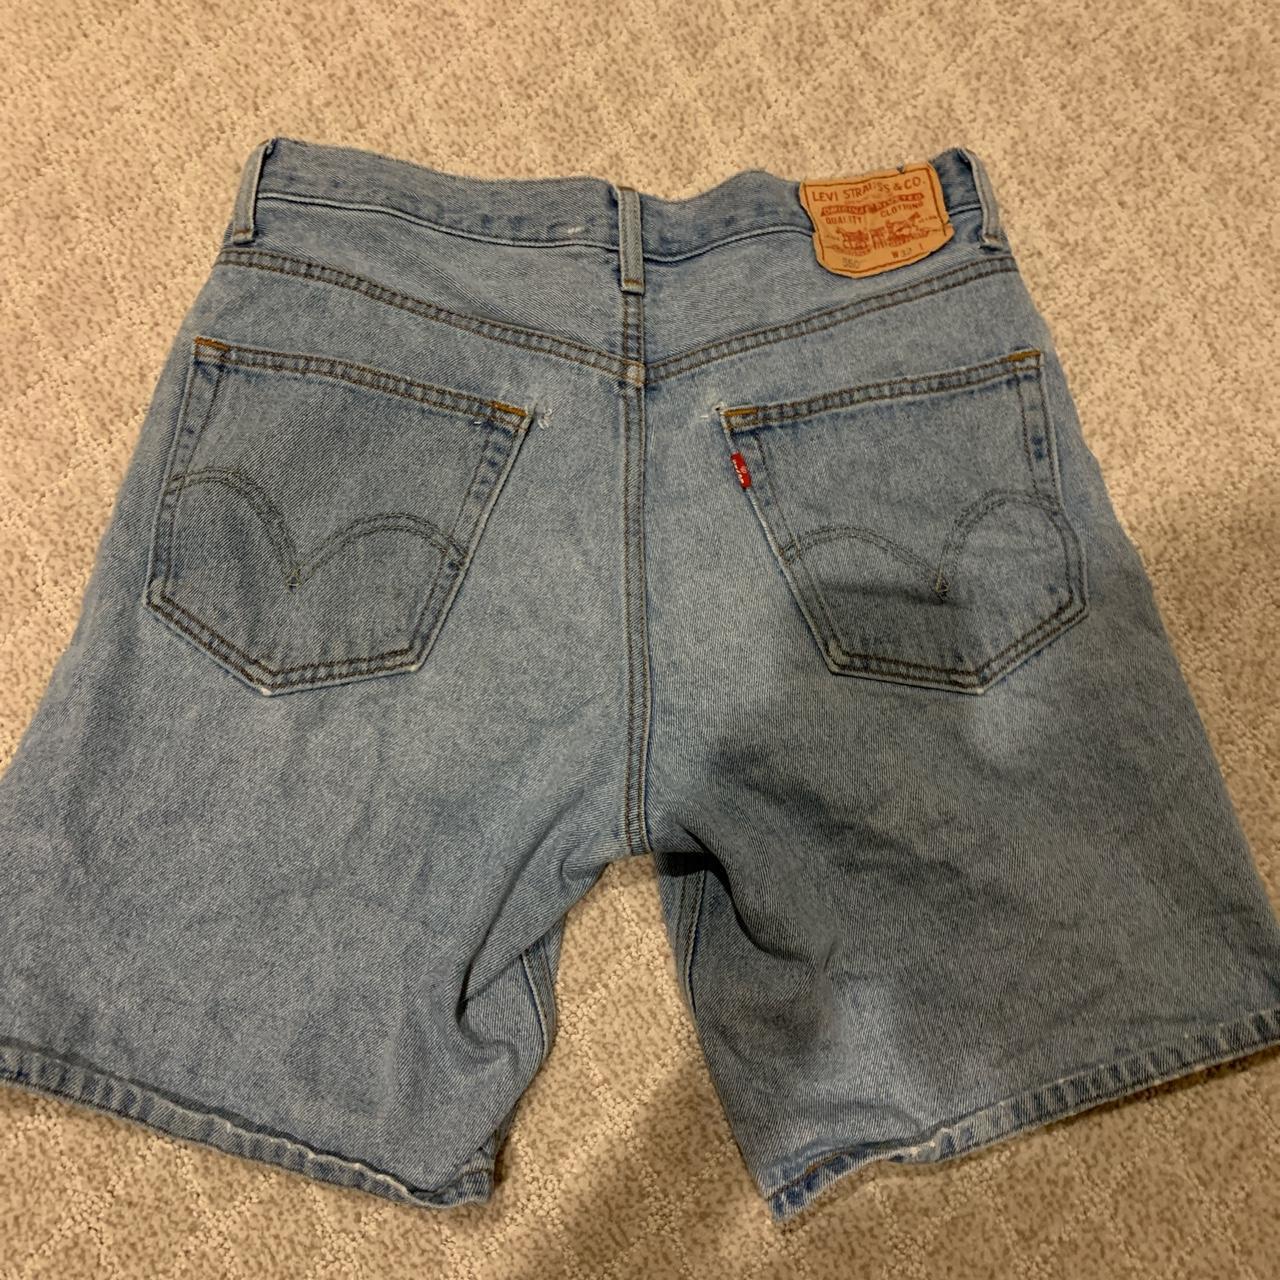 item listed by oregoncloset